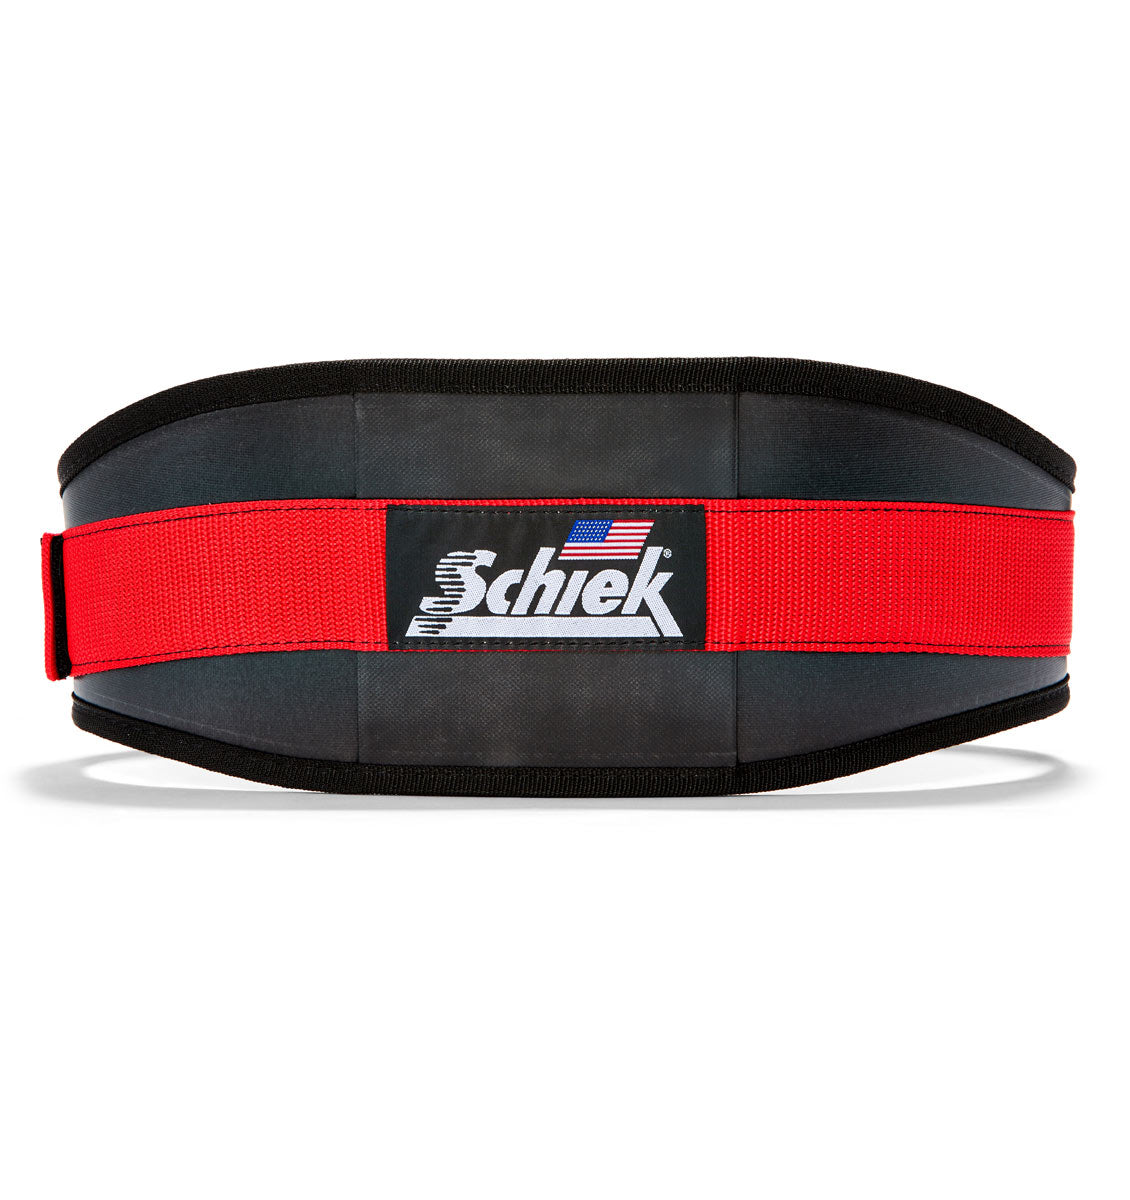 3006 Schiek Contour Weight Lifting Belt Black and Red Back